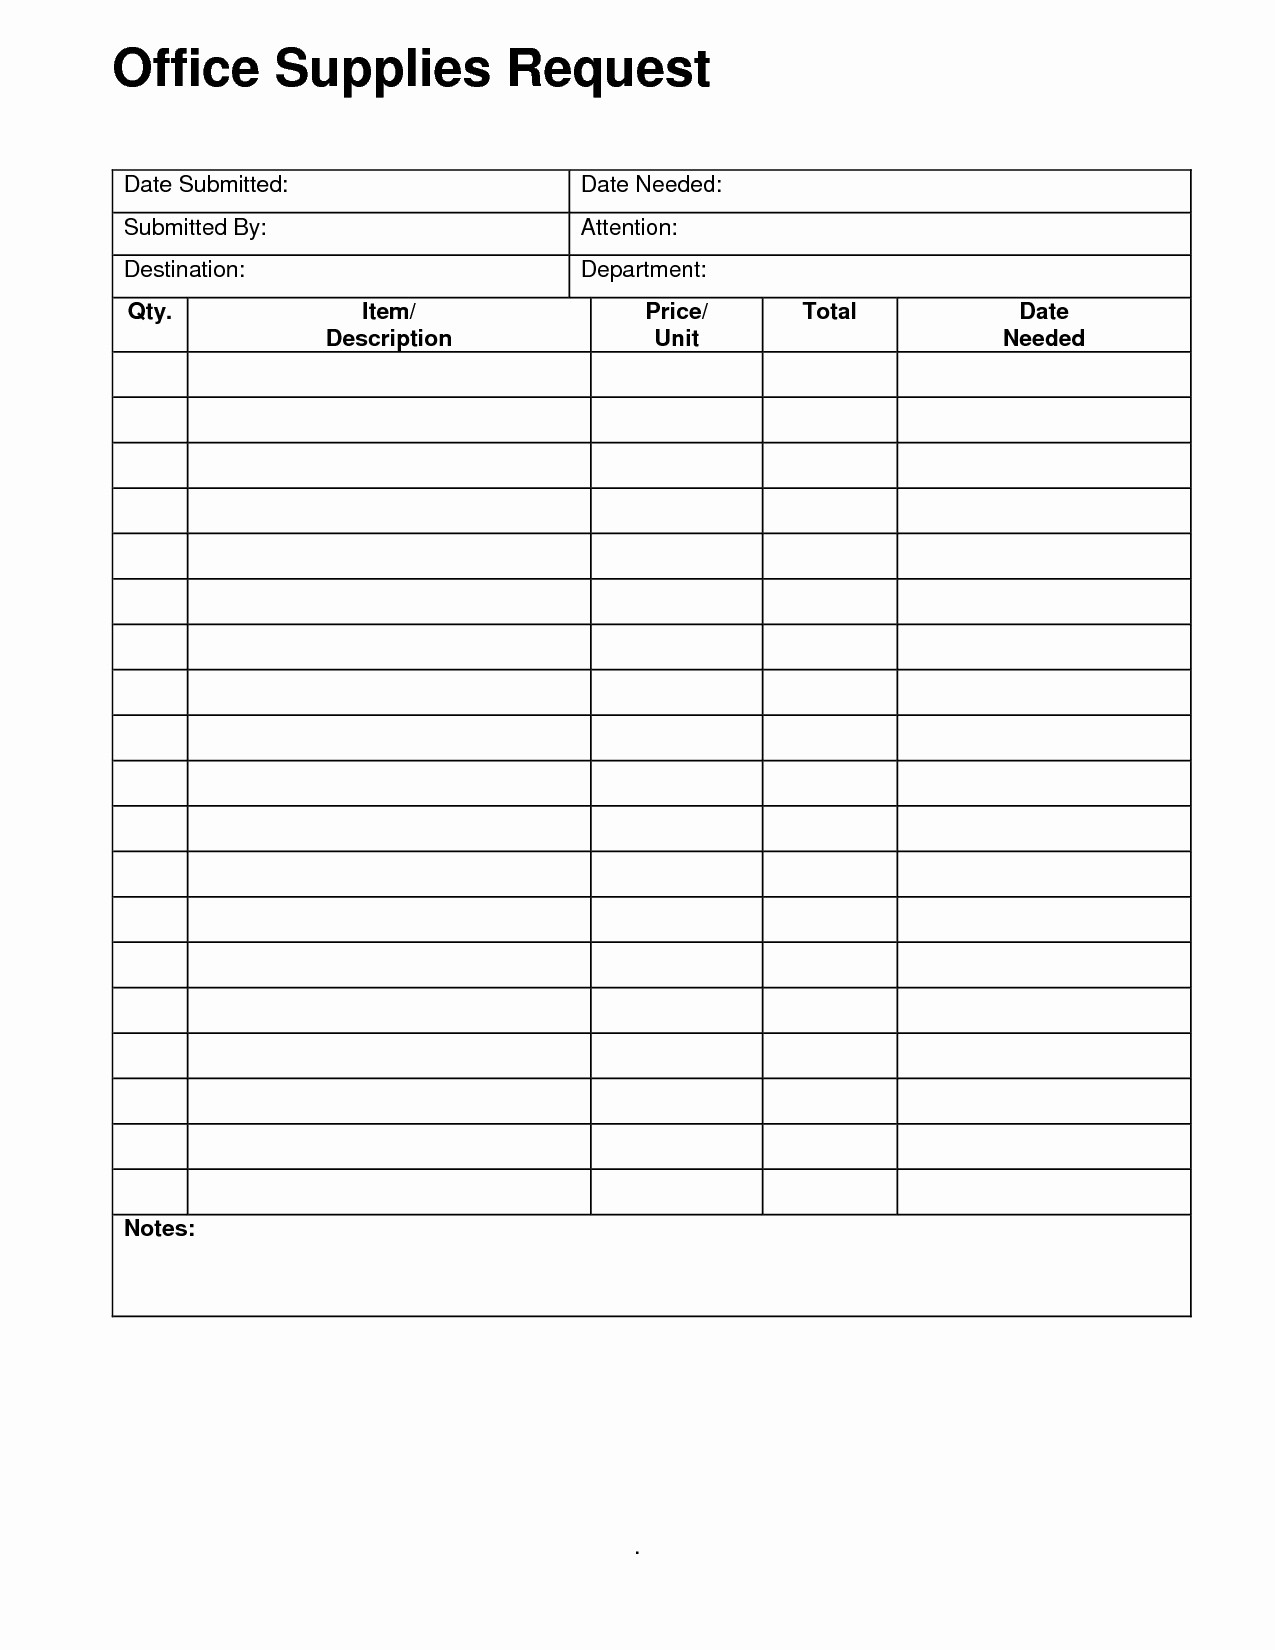 Office Supply Request form Lovely Fice Supply Checklist Templates for Your Business Violeet